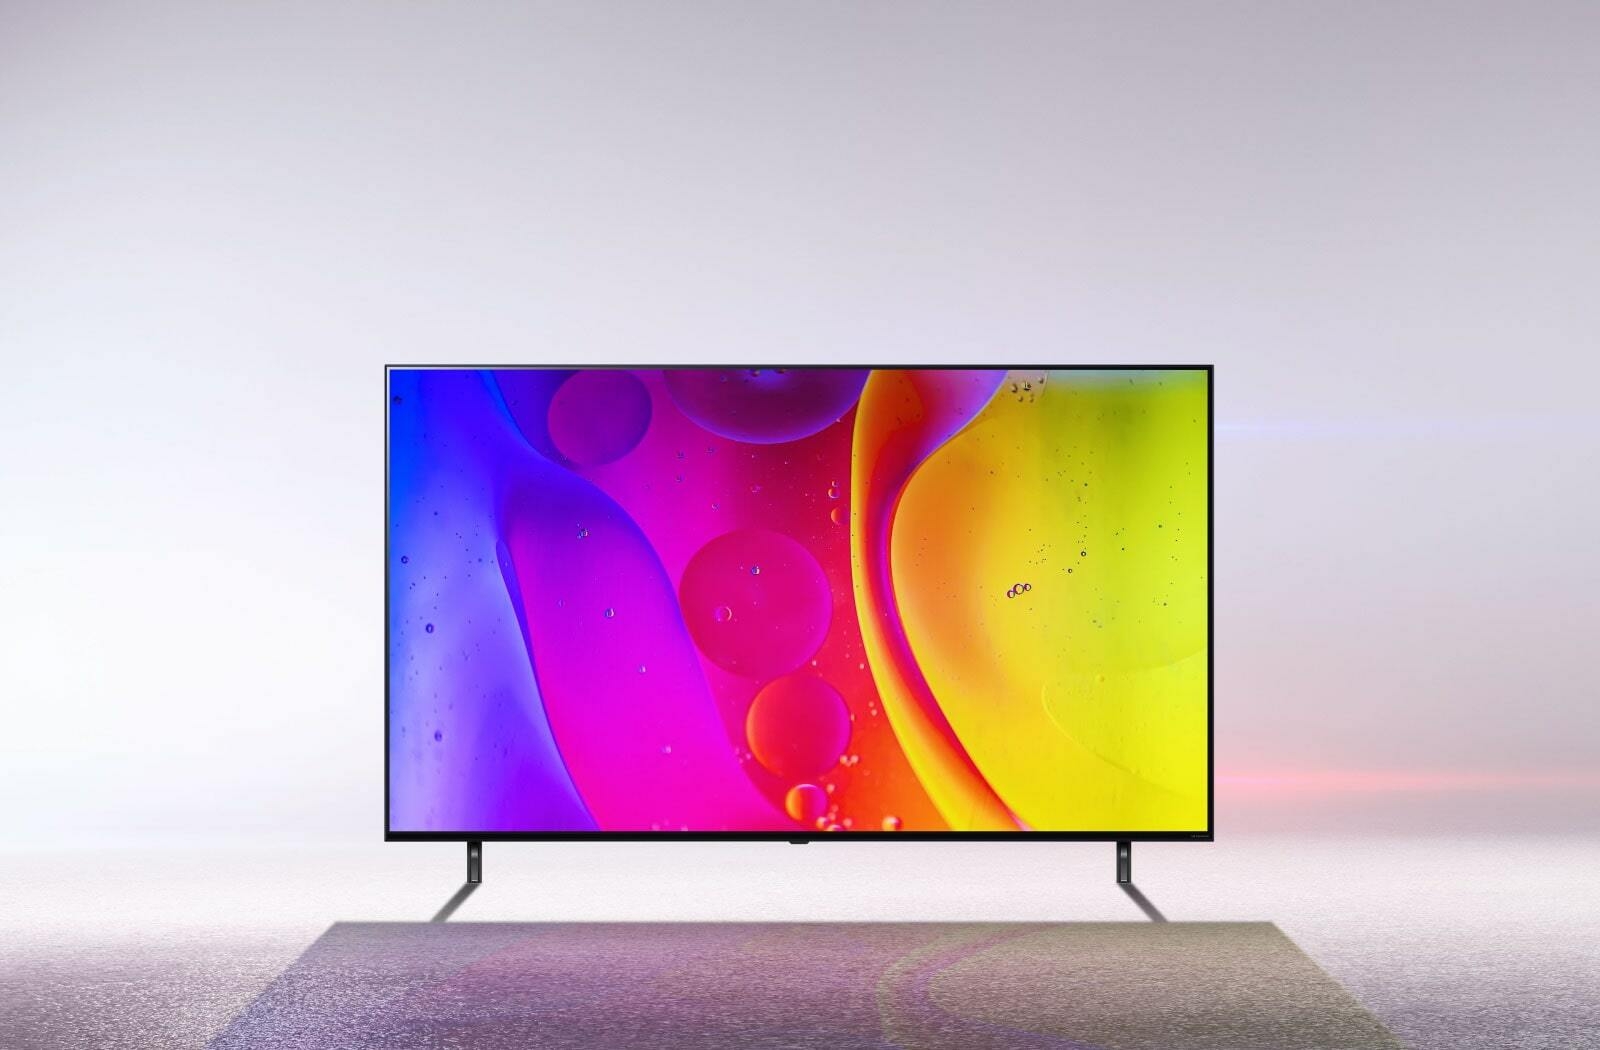 A TV in a stark white room displays bright, hypnotic moving colors on the screen.